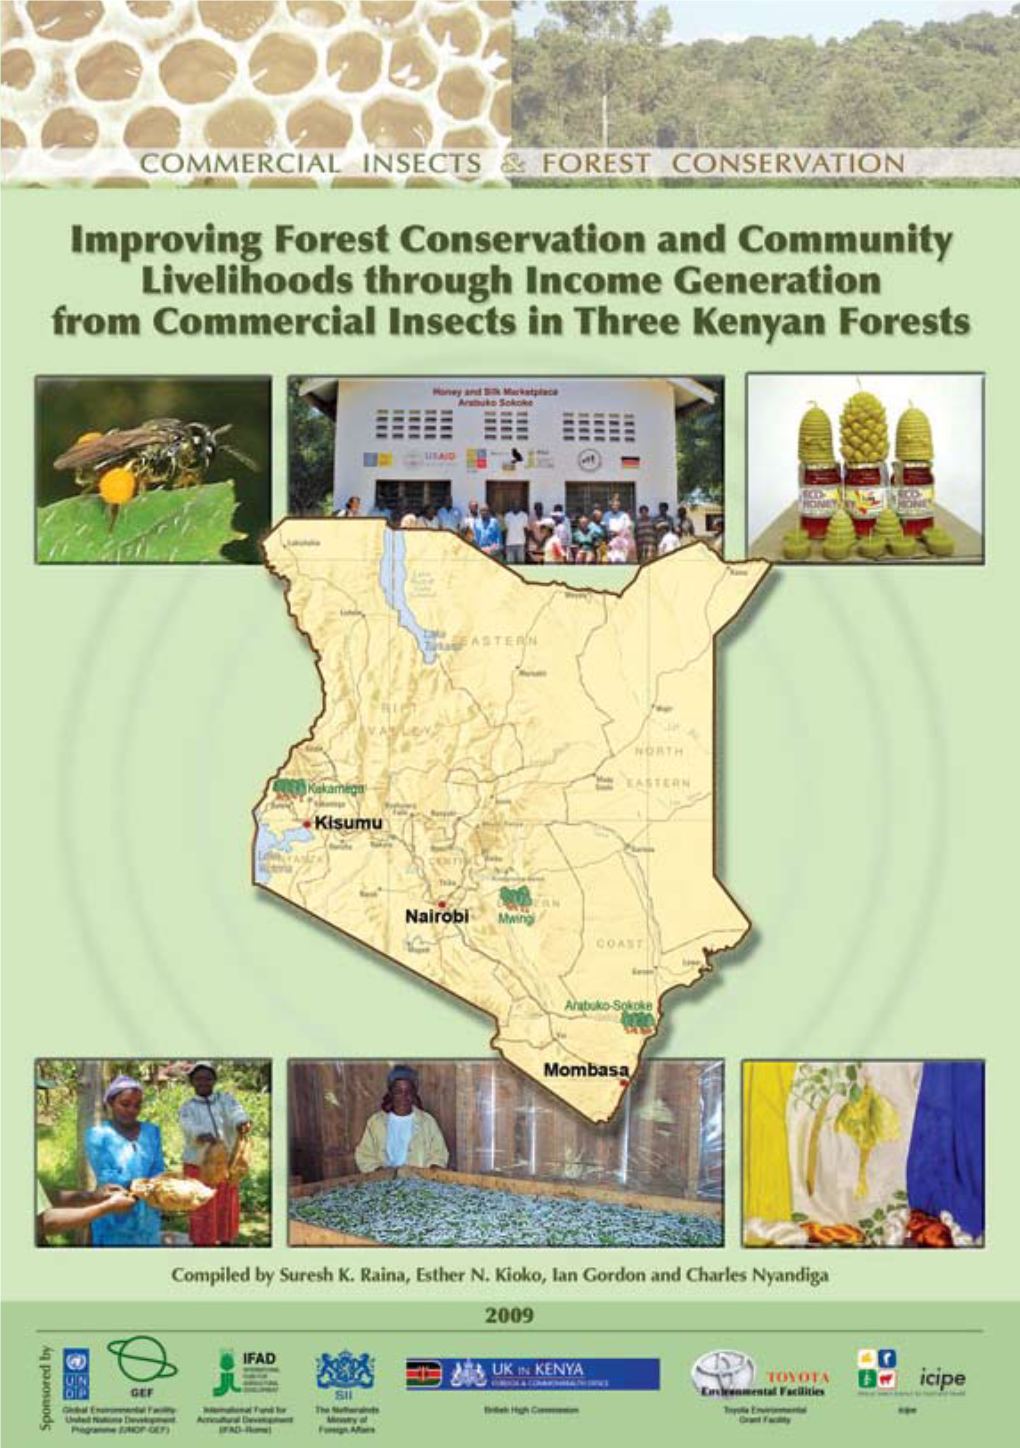 Improving Forest Conservation and Community Livelihoods Through Income Generation from Commercial Insects in Three Kenyan Forests